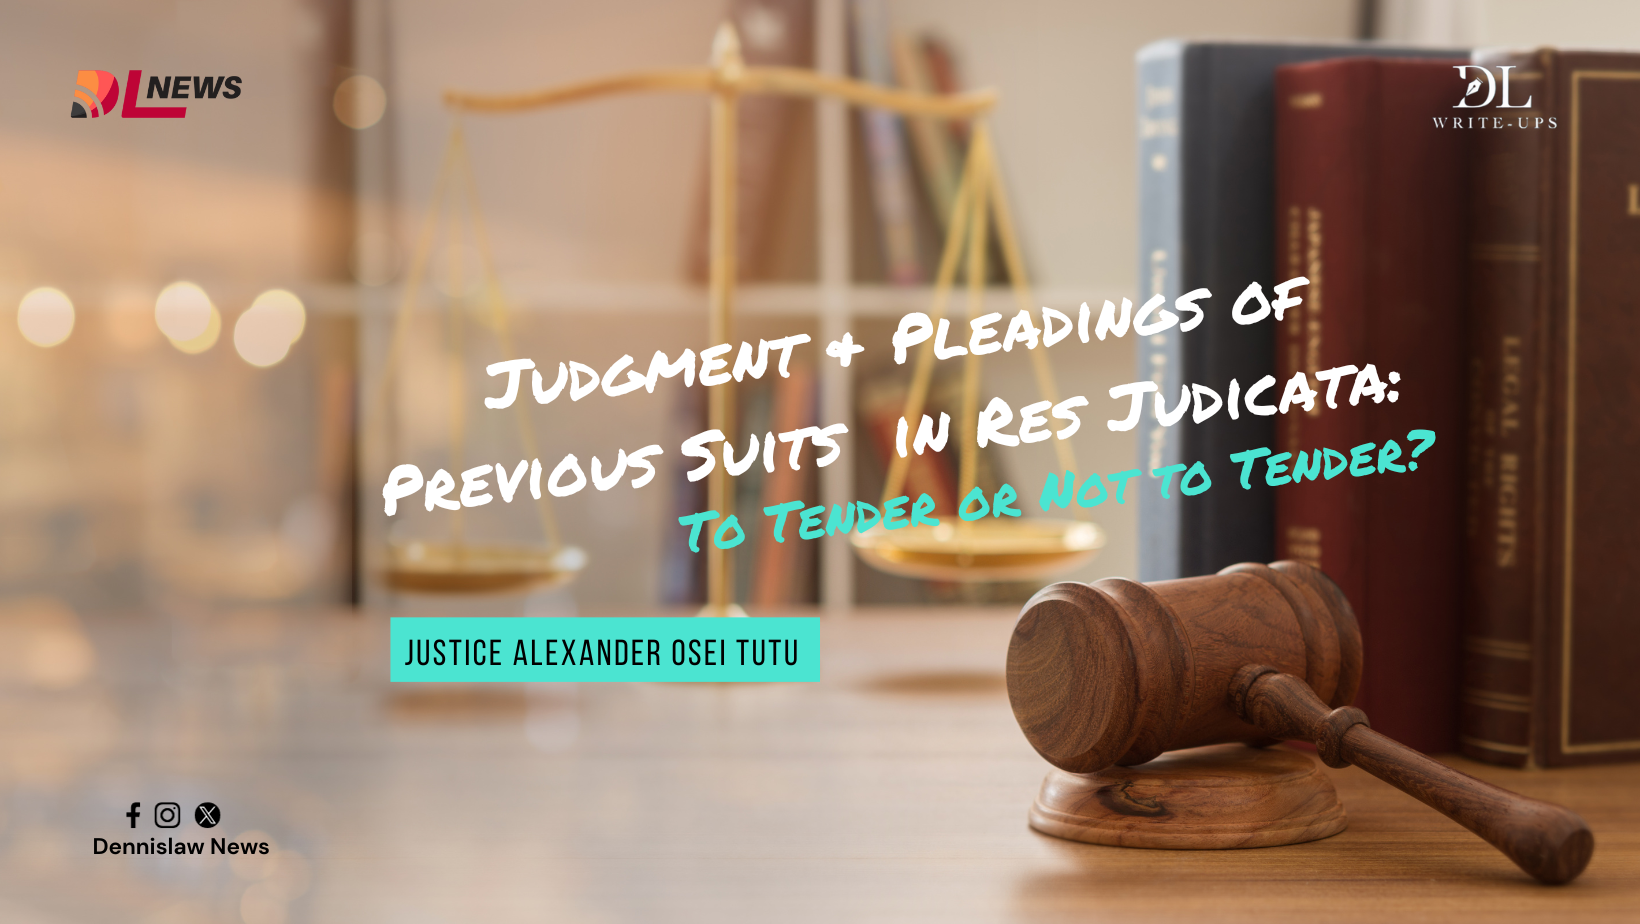 Judgment & Pleadings of Previous Suits  in Res Judicata: To Tender or Not to  Tender?